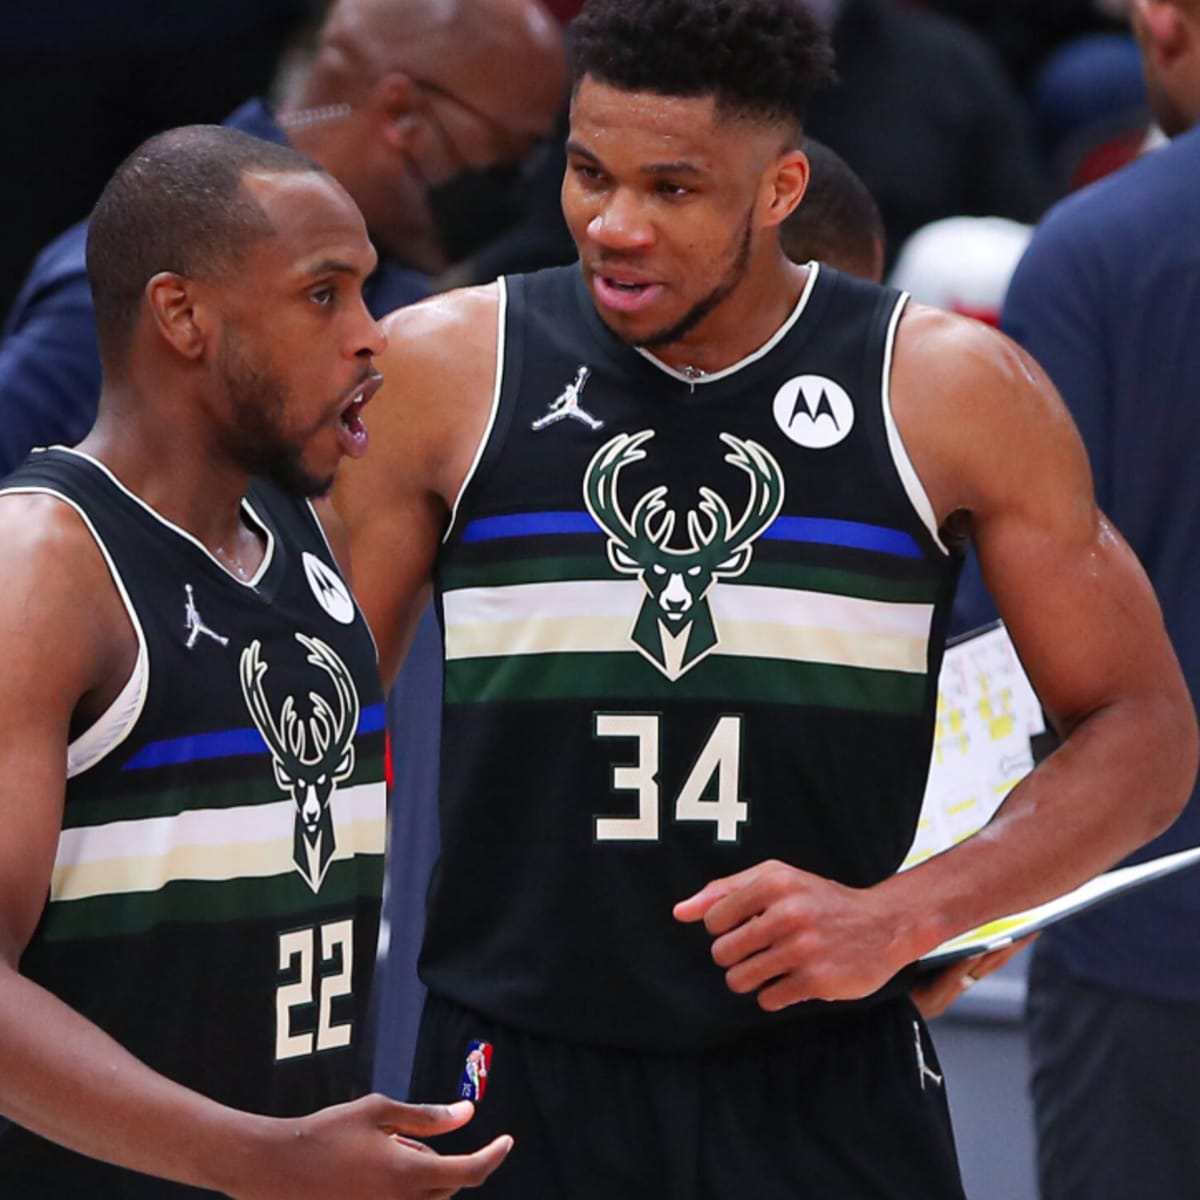 Giannis Antetokounmpo to the Warriors? It's not as crazy as you